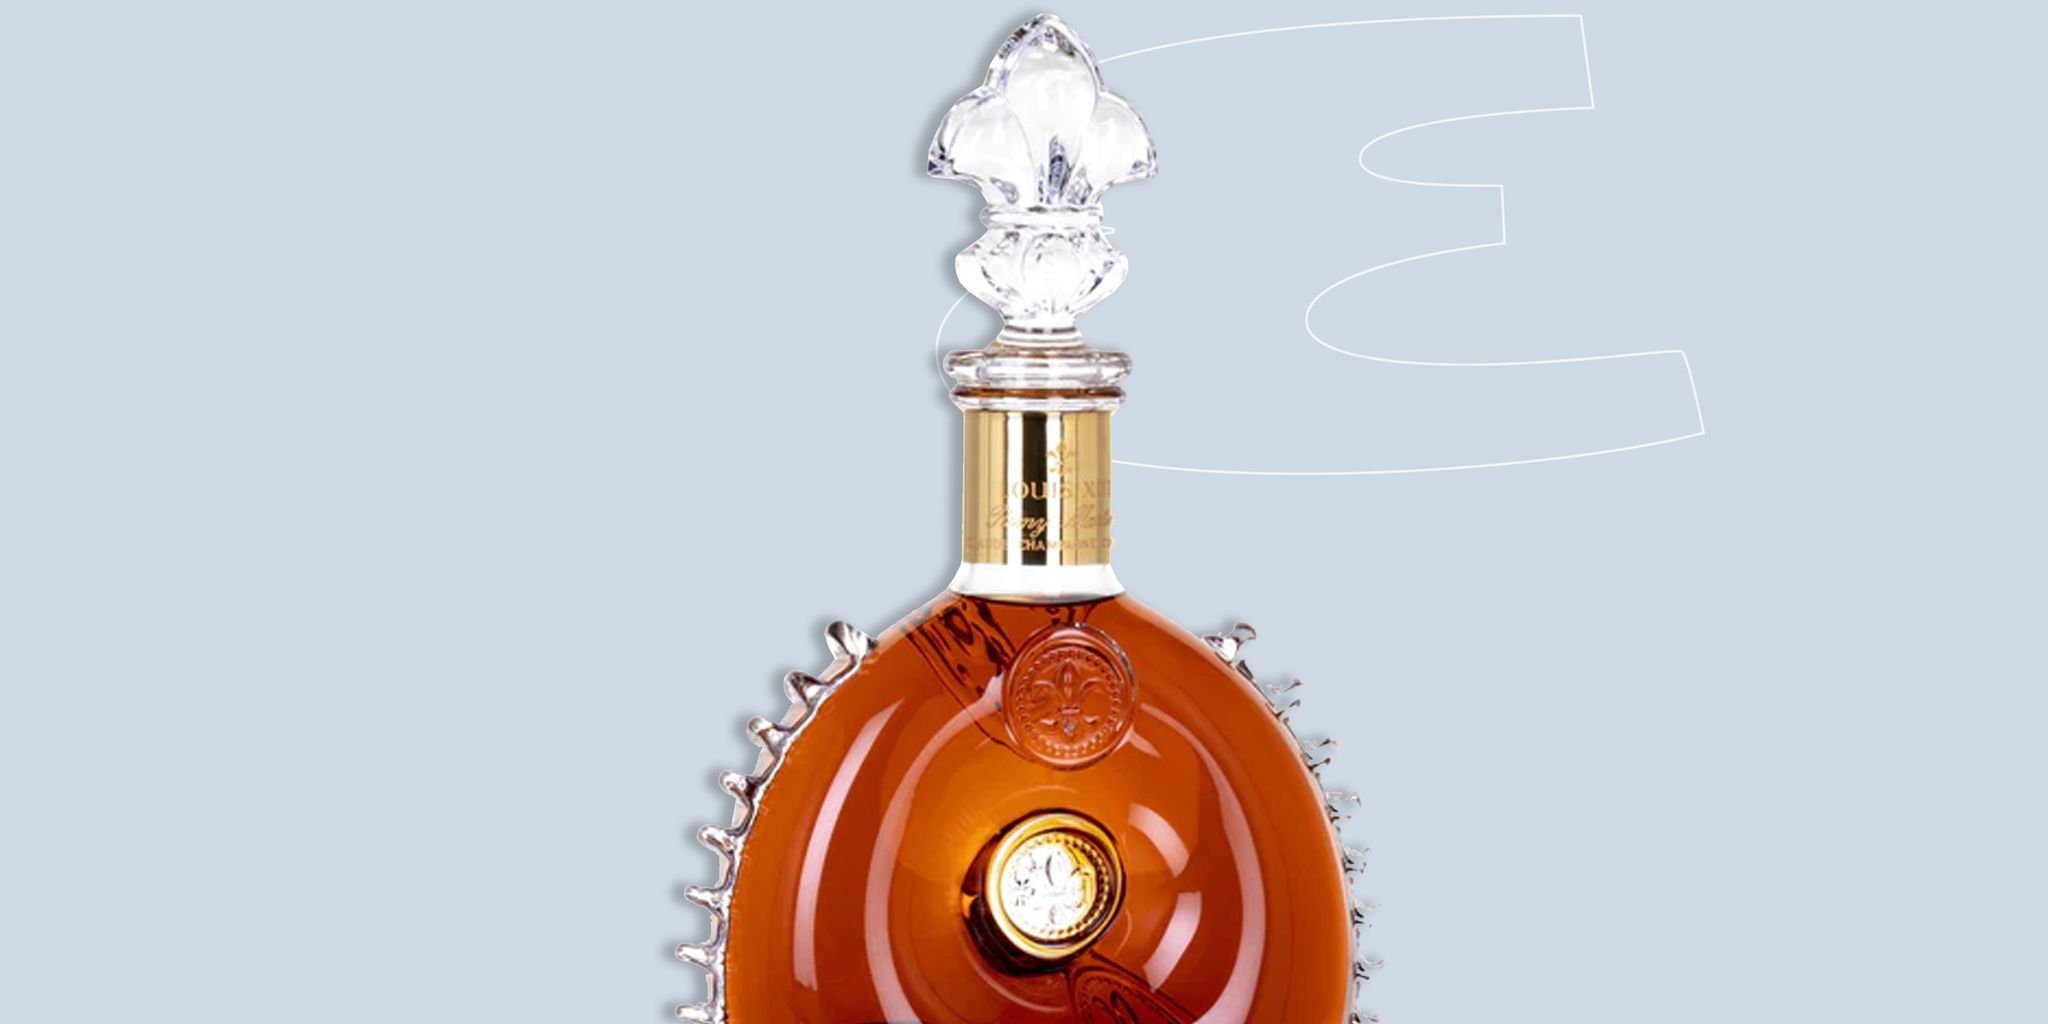 The Louis XIII Gold Bar is an ultra-extravagant candy bar